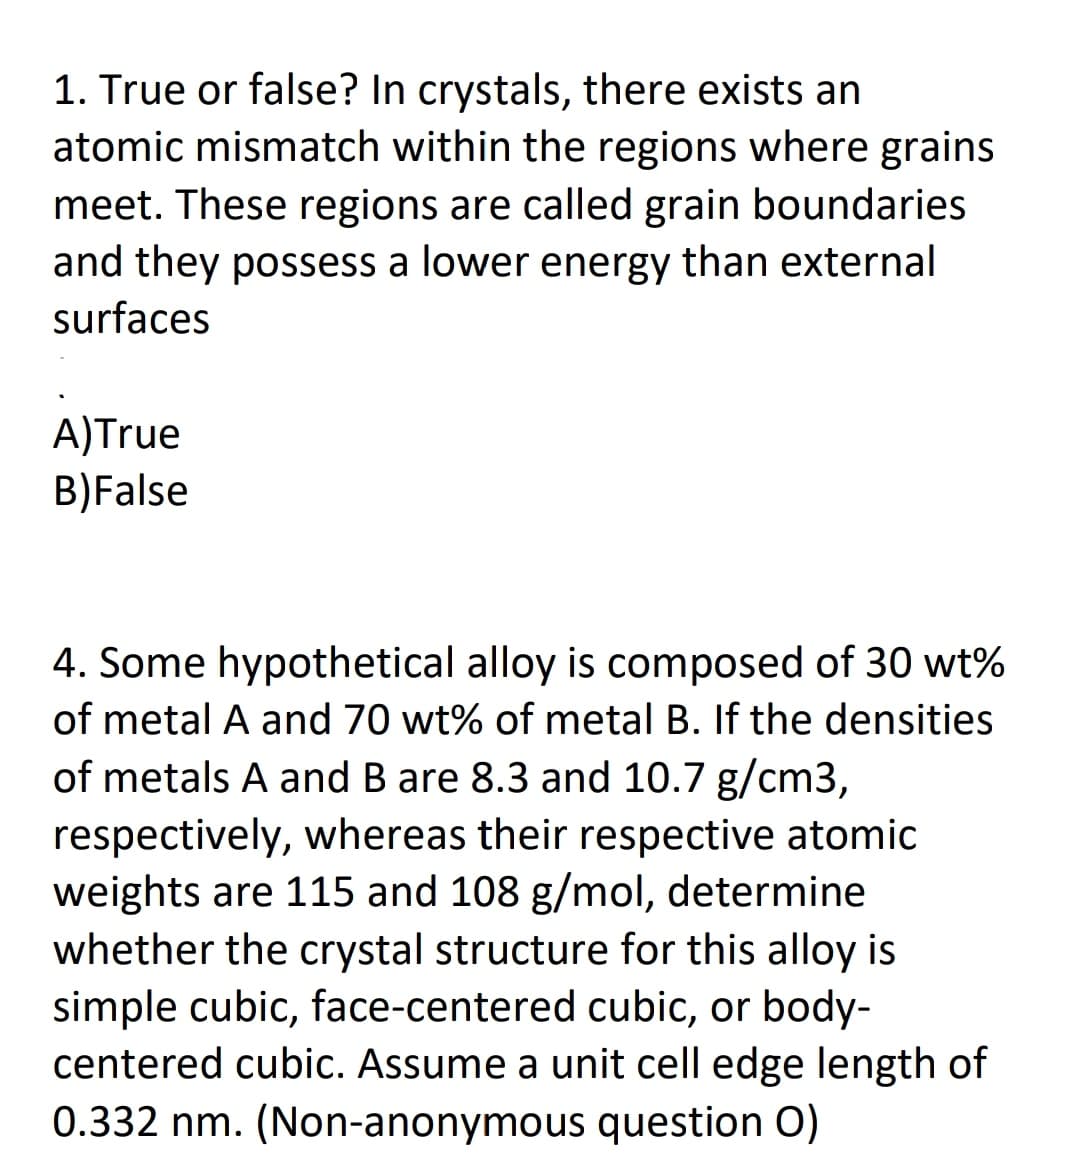 1. True or false? In crystals, there exists an
atomic mismatch within the regions where grains
meet. These regions are called grain boundaries
and they possess a lower energy than external
surfaces
A)True
B)False
4. Some hypothetical alloy is composed of 30 wt%
of metal A and 70 wt% of metal B. If the densities
of metals A and B are 8.3 and 10.7 g/cm3,
respectively, whereas their respective atomic
weights are 115 and 108 g/mol, determine
whether the crystal structure for this alloy is
simple cubic, face-centered cubic, or body-
centered cubic. Assume a unit cell edge length of
0.332 nm. (Non-anonymous question O)
